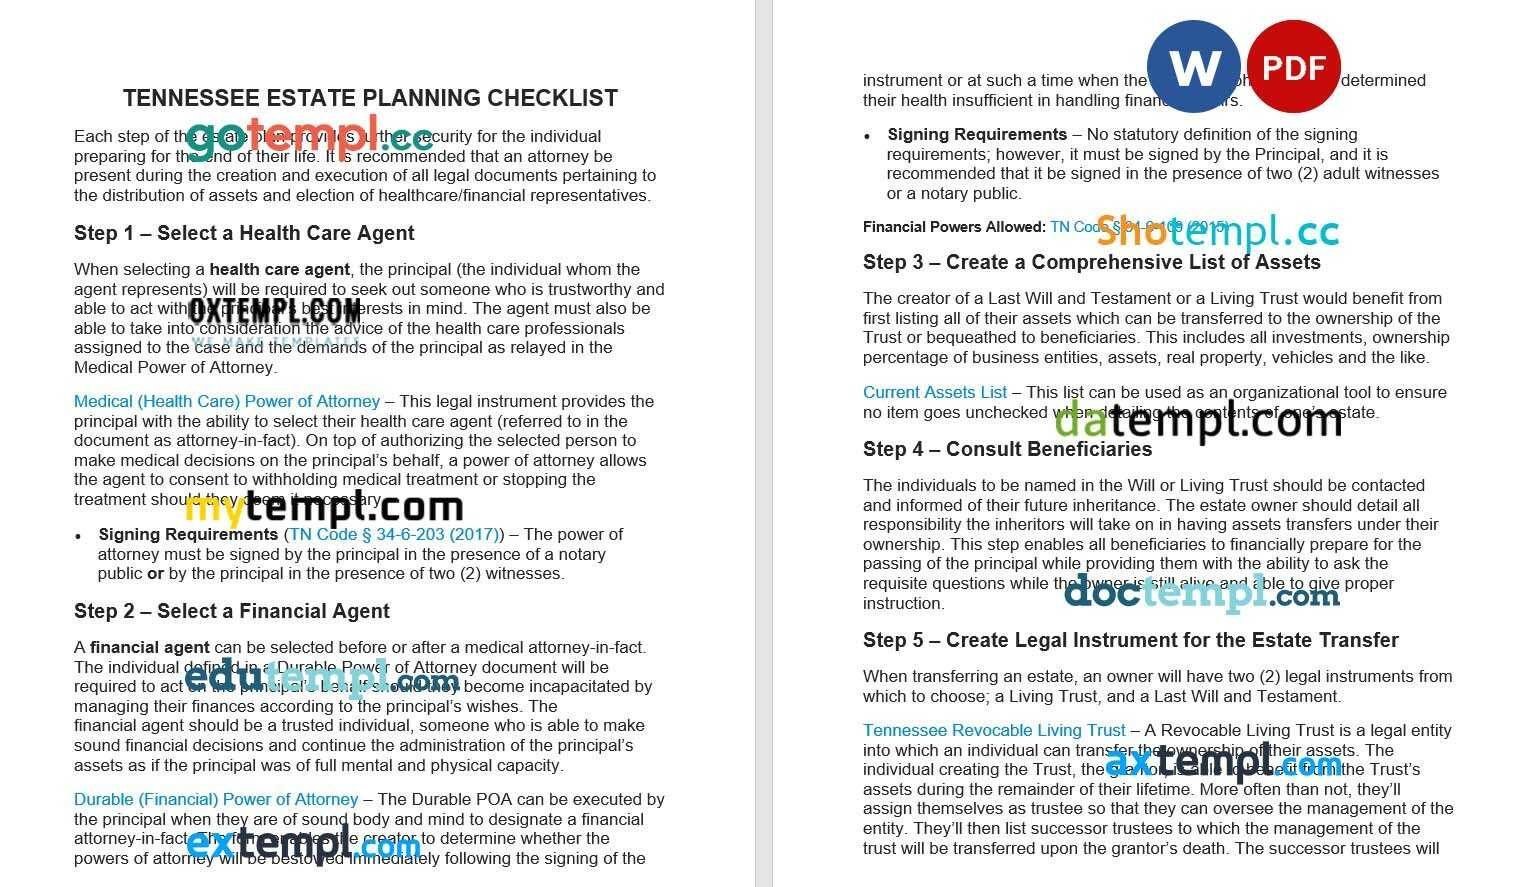 Tennessee Estate Planning Checklist example, fully editable